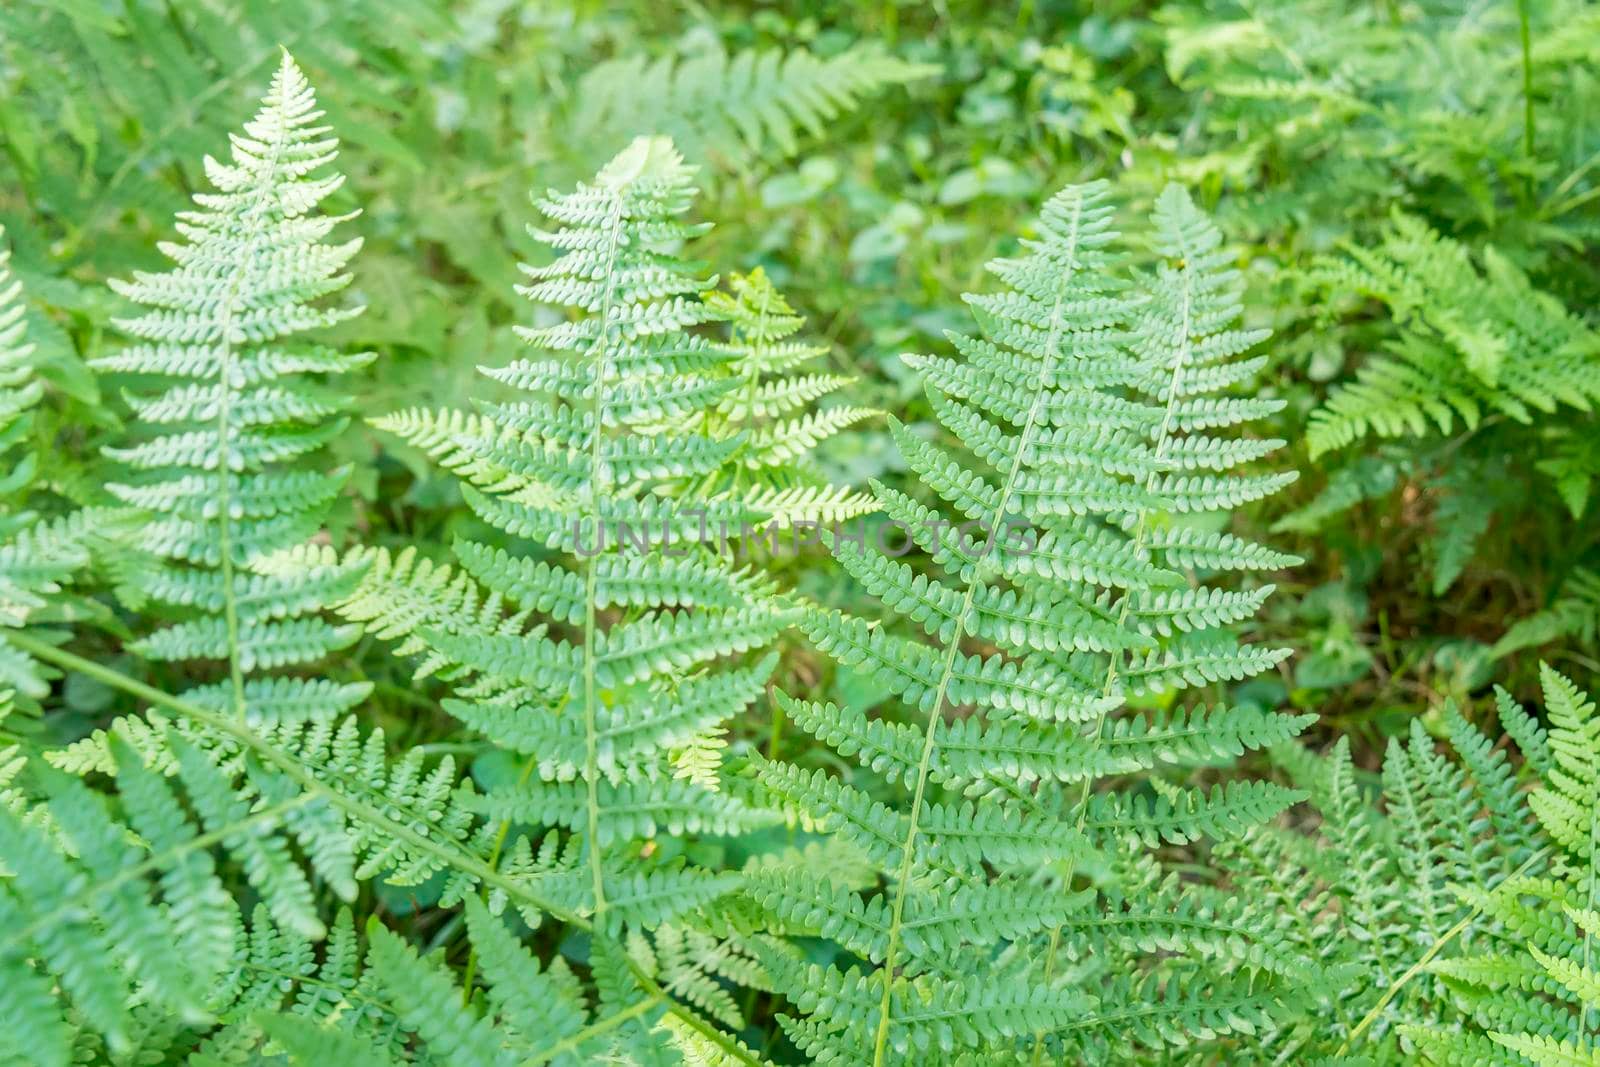 Fern detail in the shaded forest.